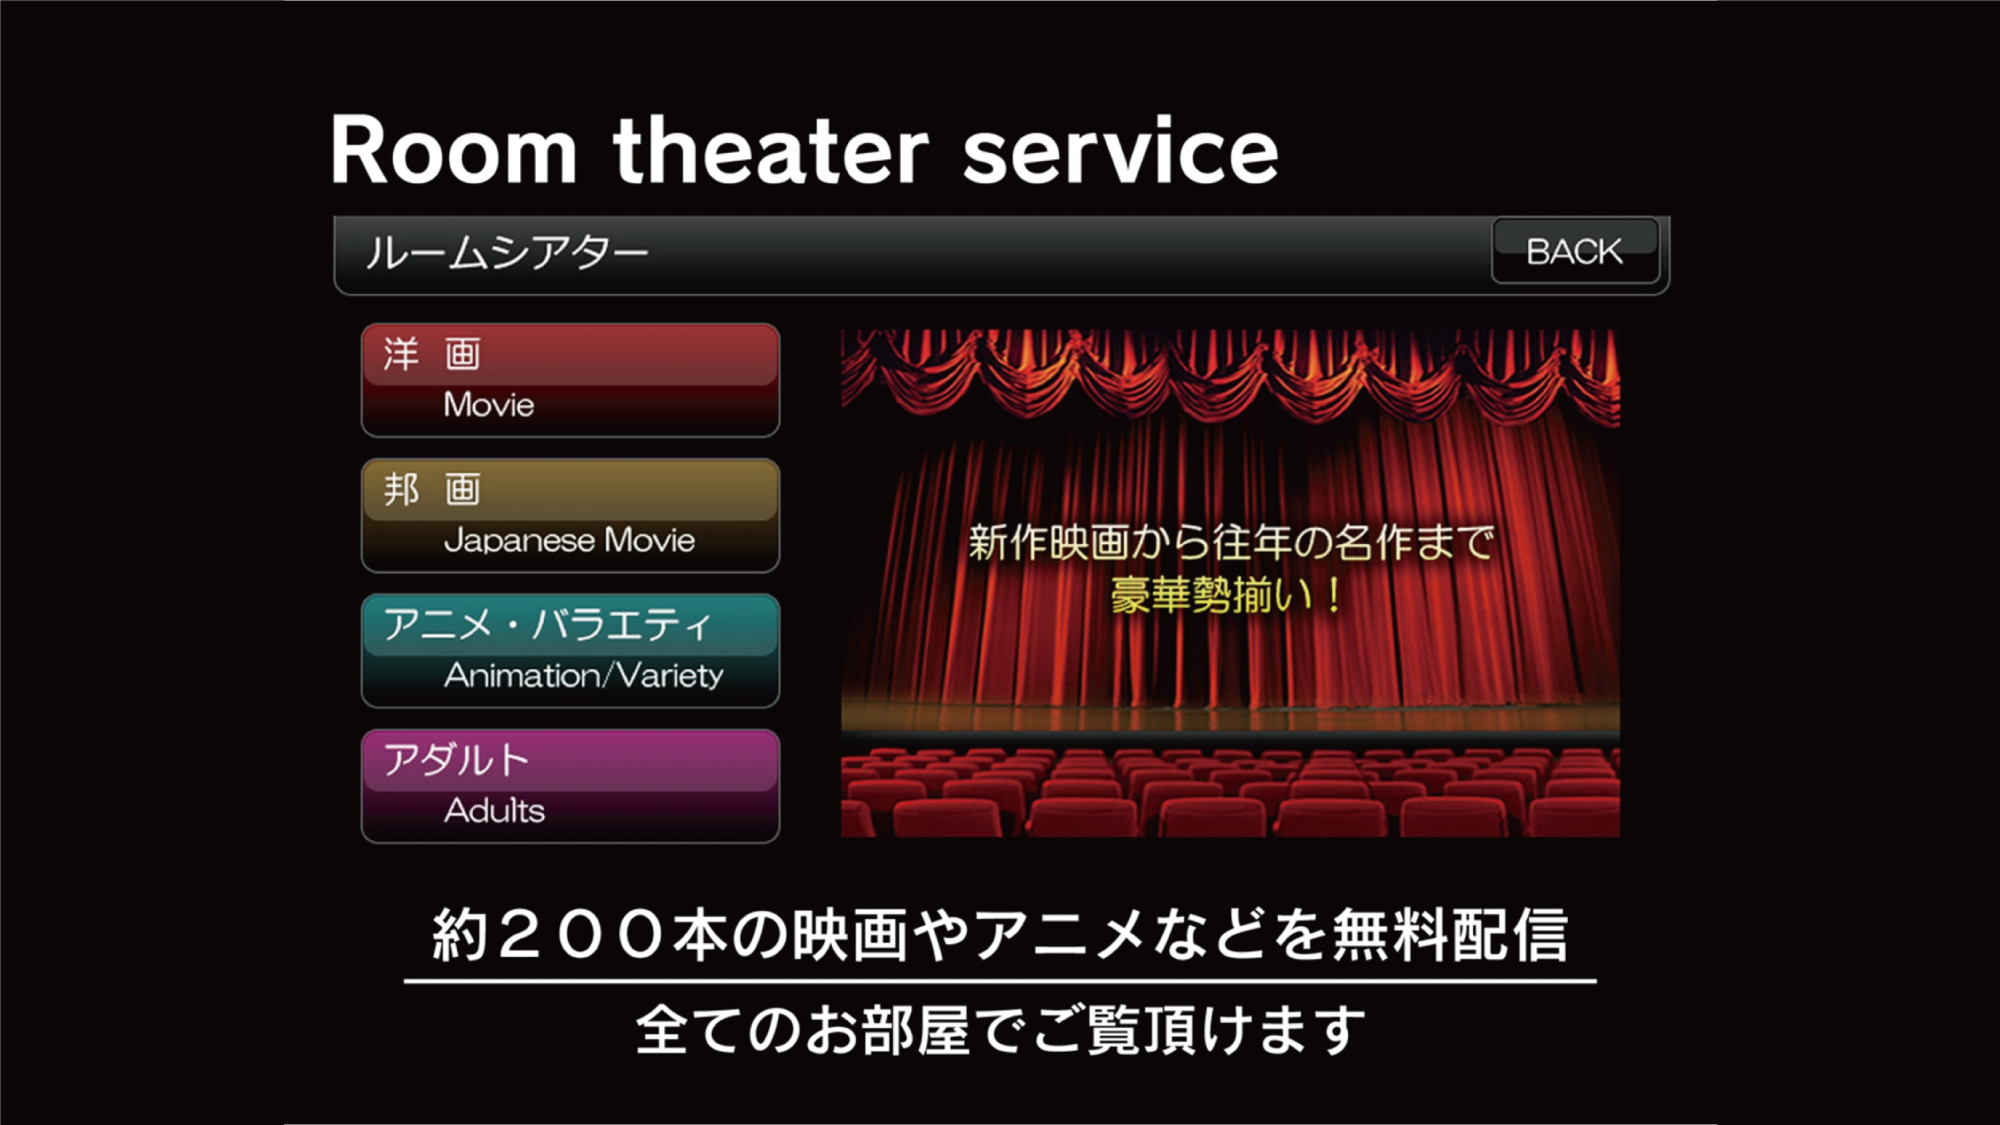 【Room theater service】